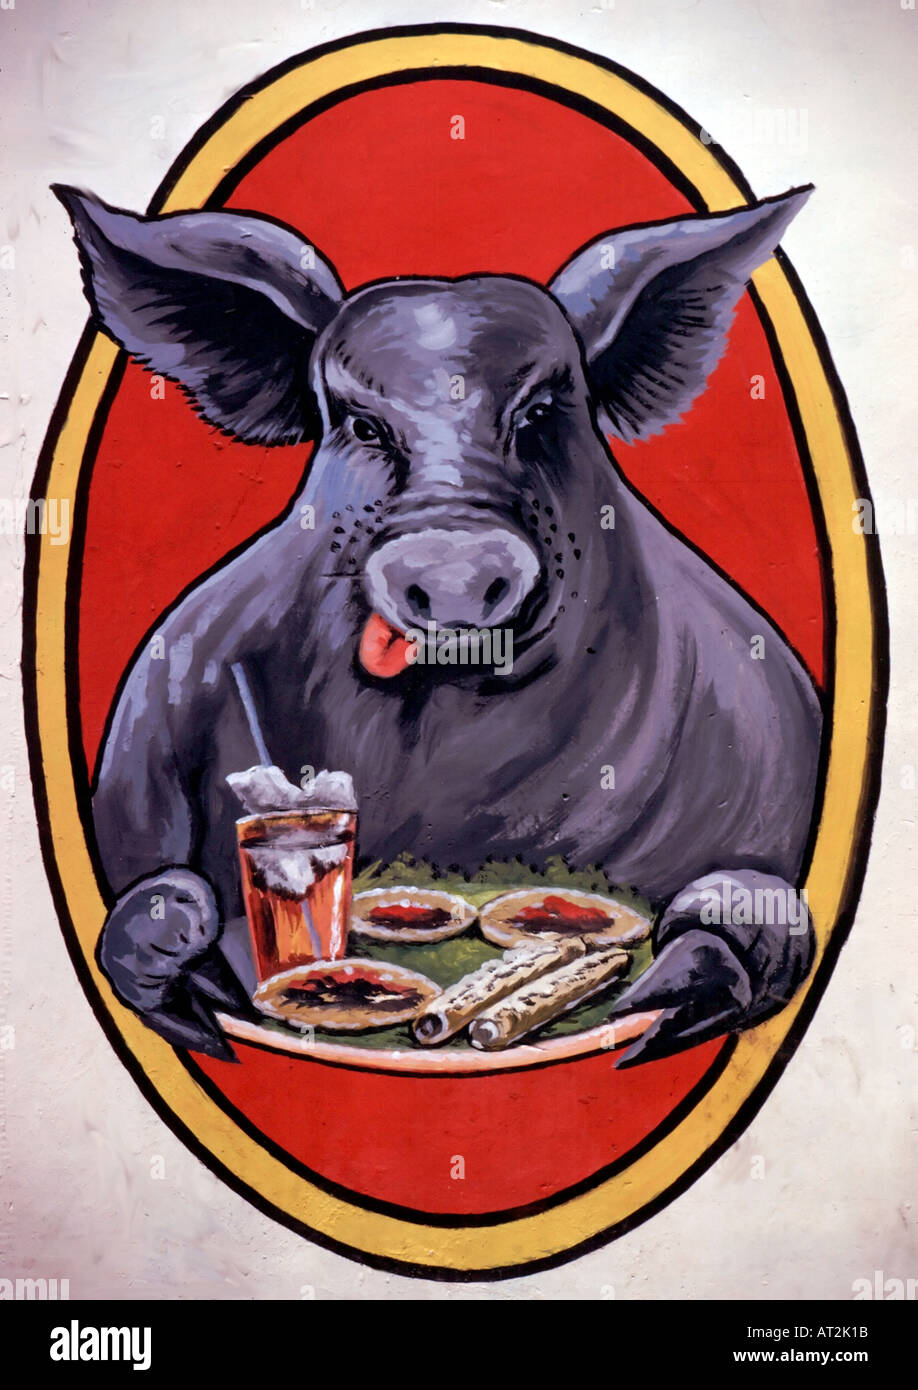 A happy bull is ready to enjoy a Mexican meal in this mural on a restaurant wall in Oaxaca Mexico Stock Photo